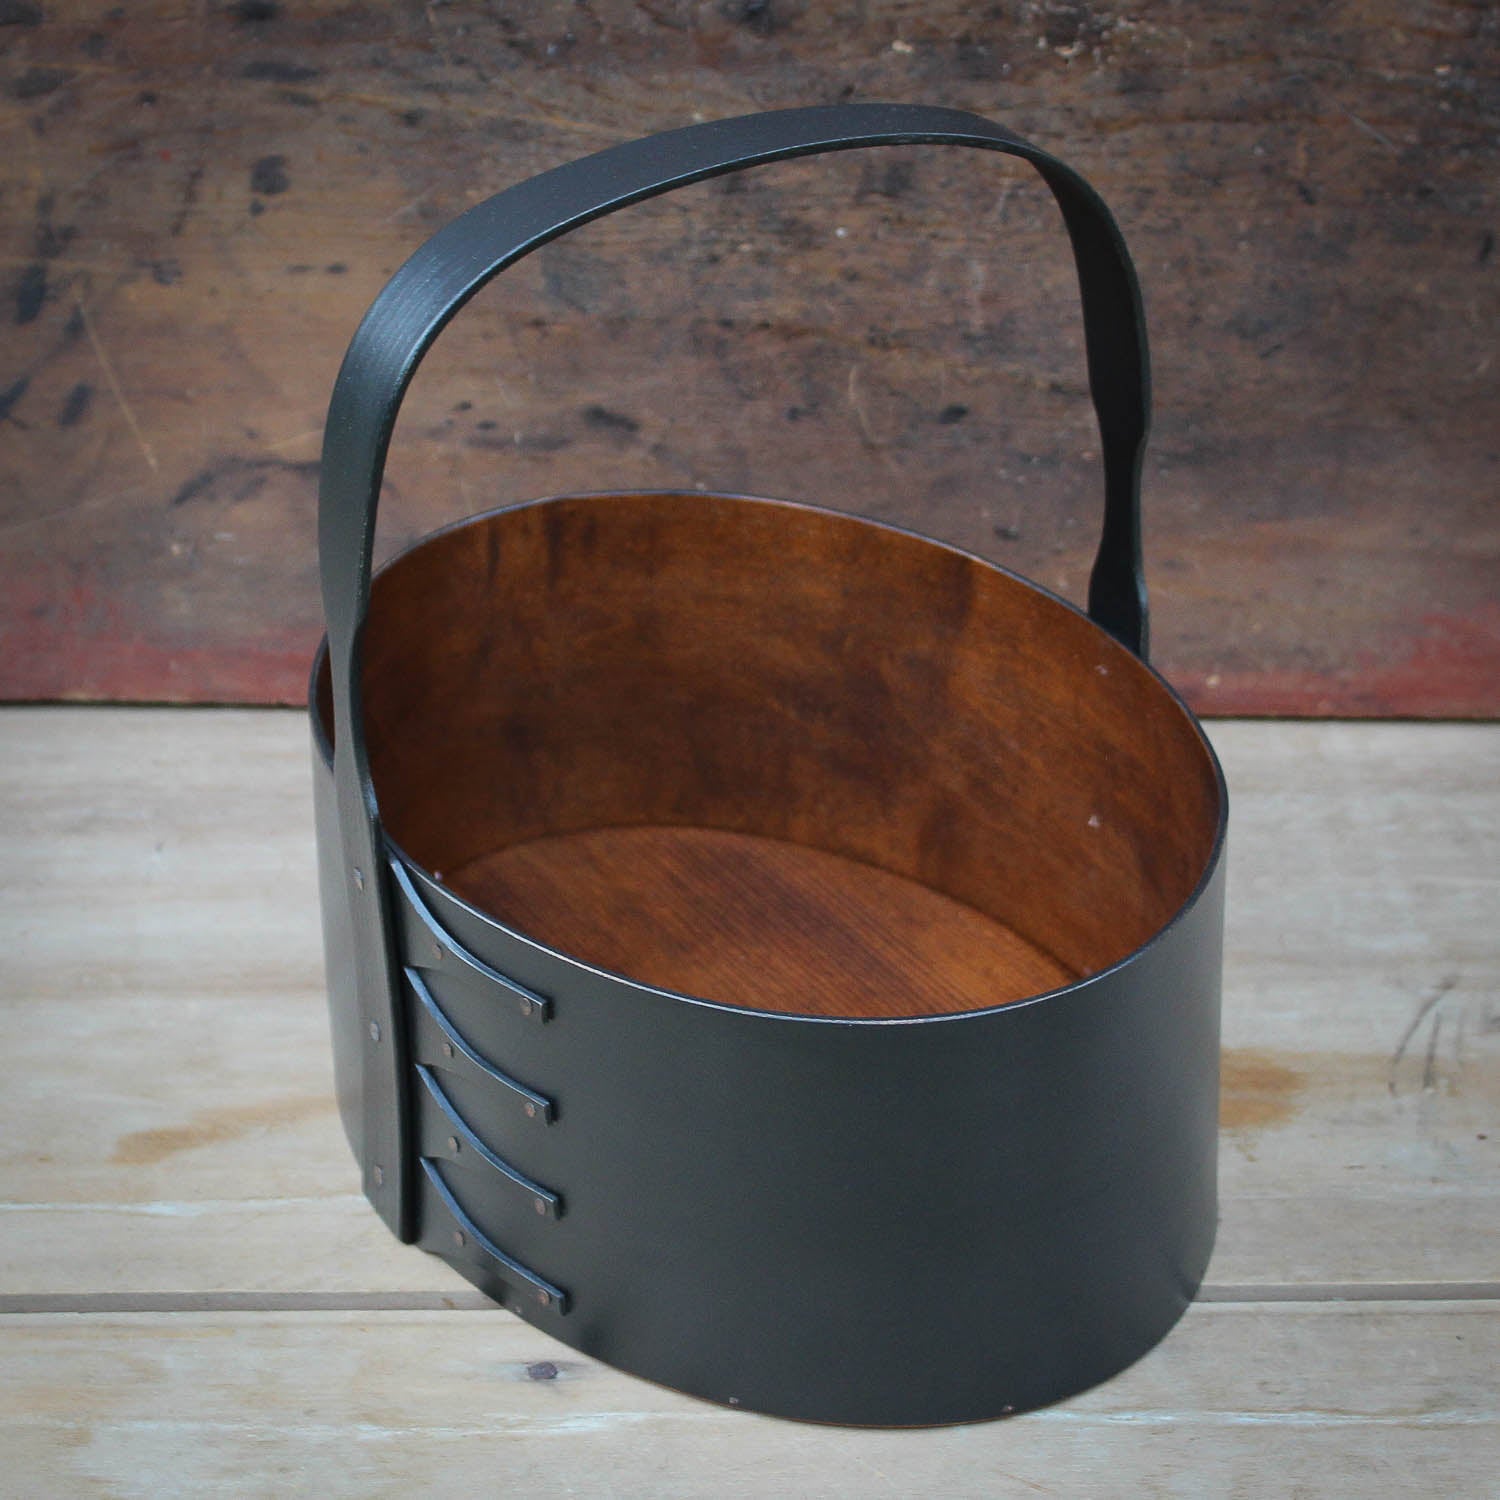 Shaker Carrier, Size #6, LeHays Shaker Boxes, Handcrafted in Maine, Black Milk Paint Finish, Side View